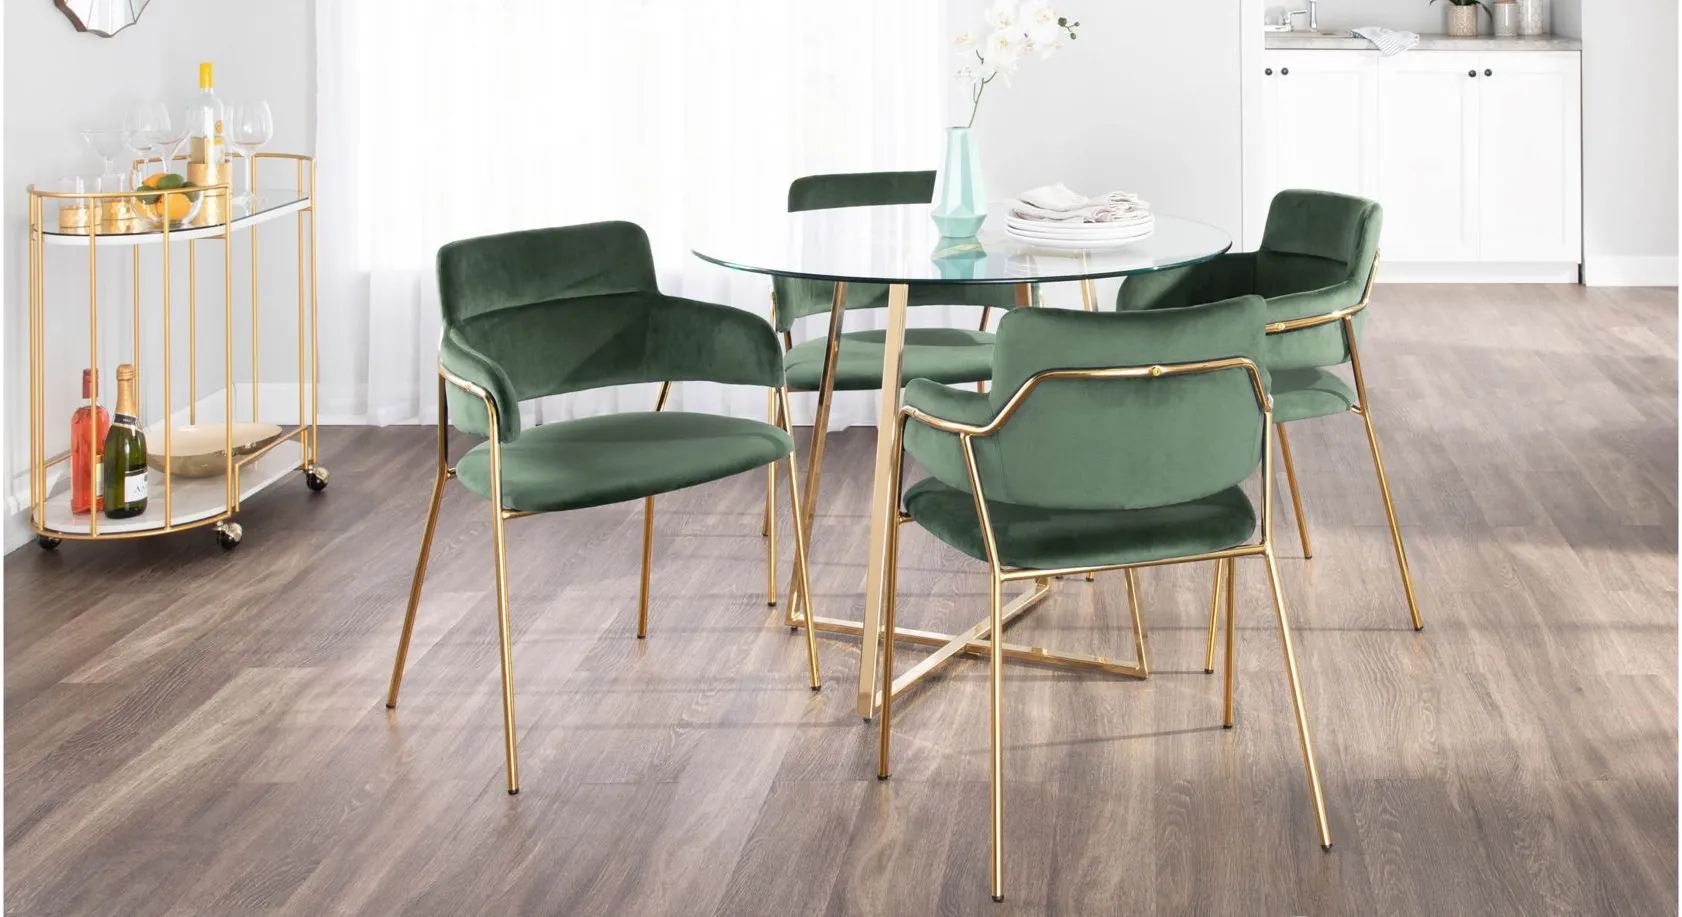 Lumisource Napoli Dining Chairs: Set of 2 in Gold, Emerald Green by Lumisource